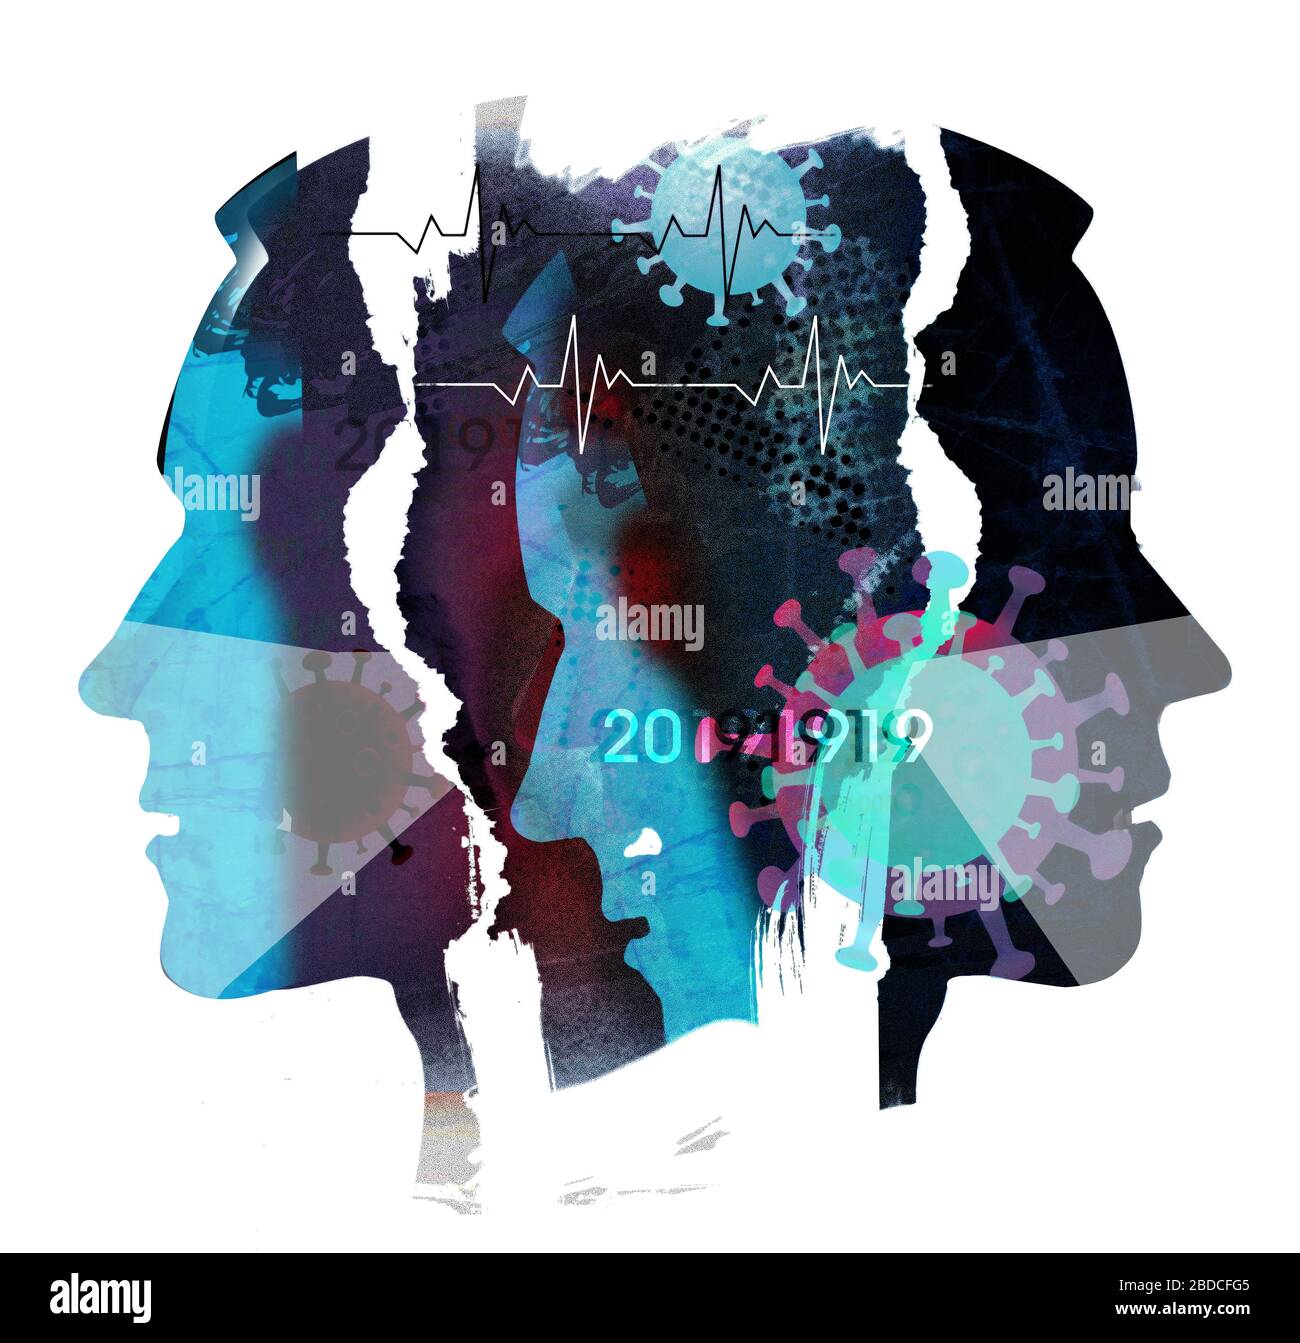 Pandemic of coronavirus, depressed people with face masks.  Male heads, grunge expressive black collage of stylized silhouettes shown in profile. Stock Photo